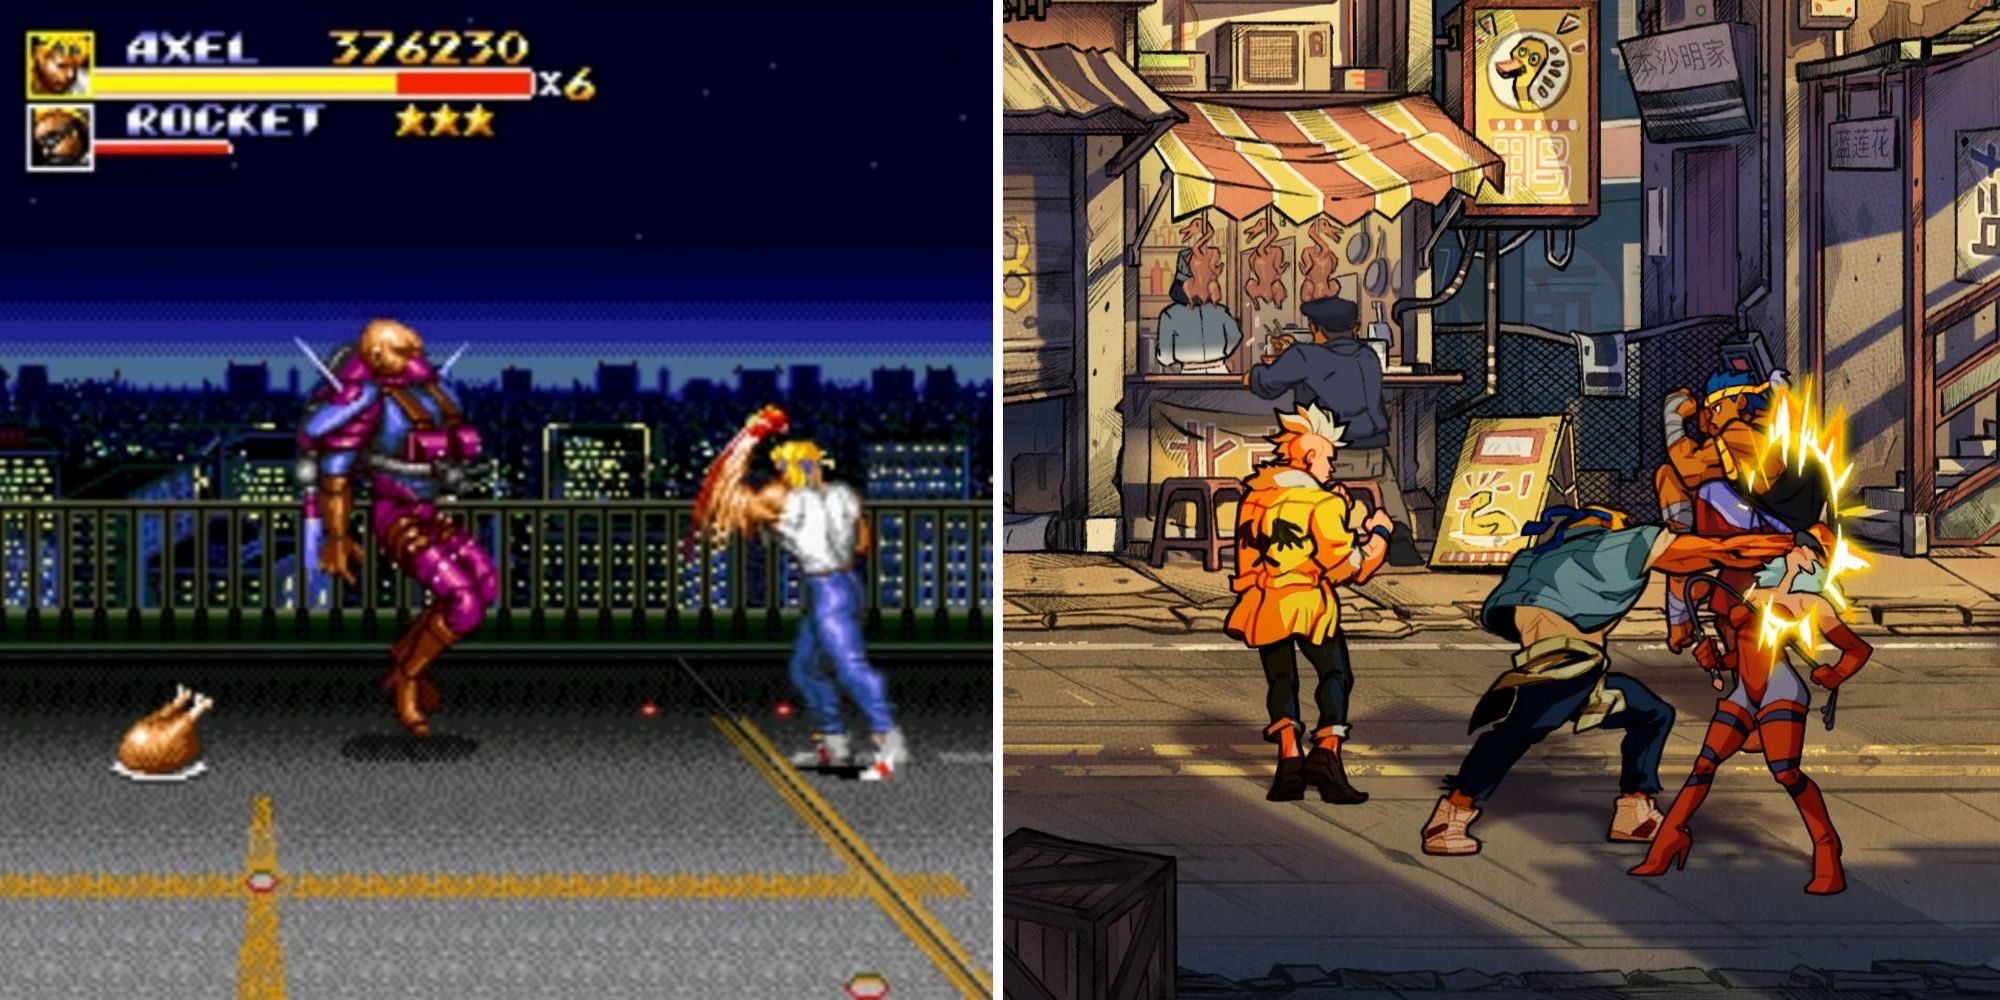 sequels-streets-of-rage-3-and-streets-of-rage-4-1-3419814